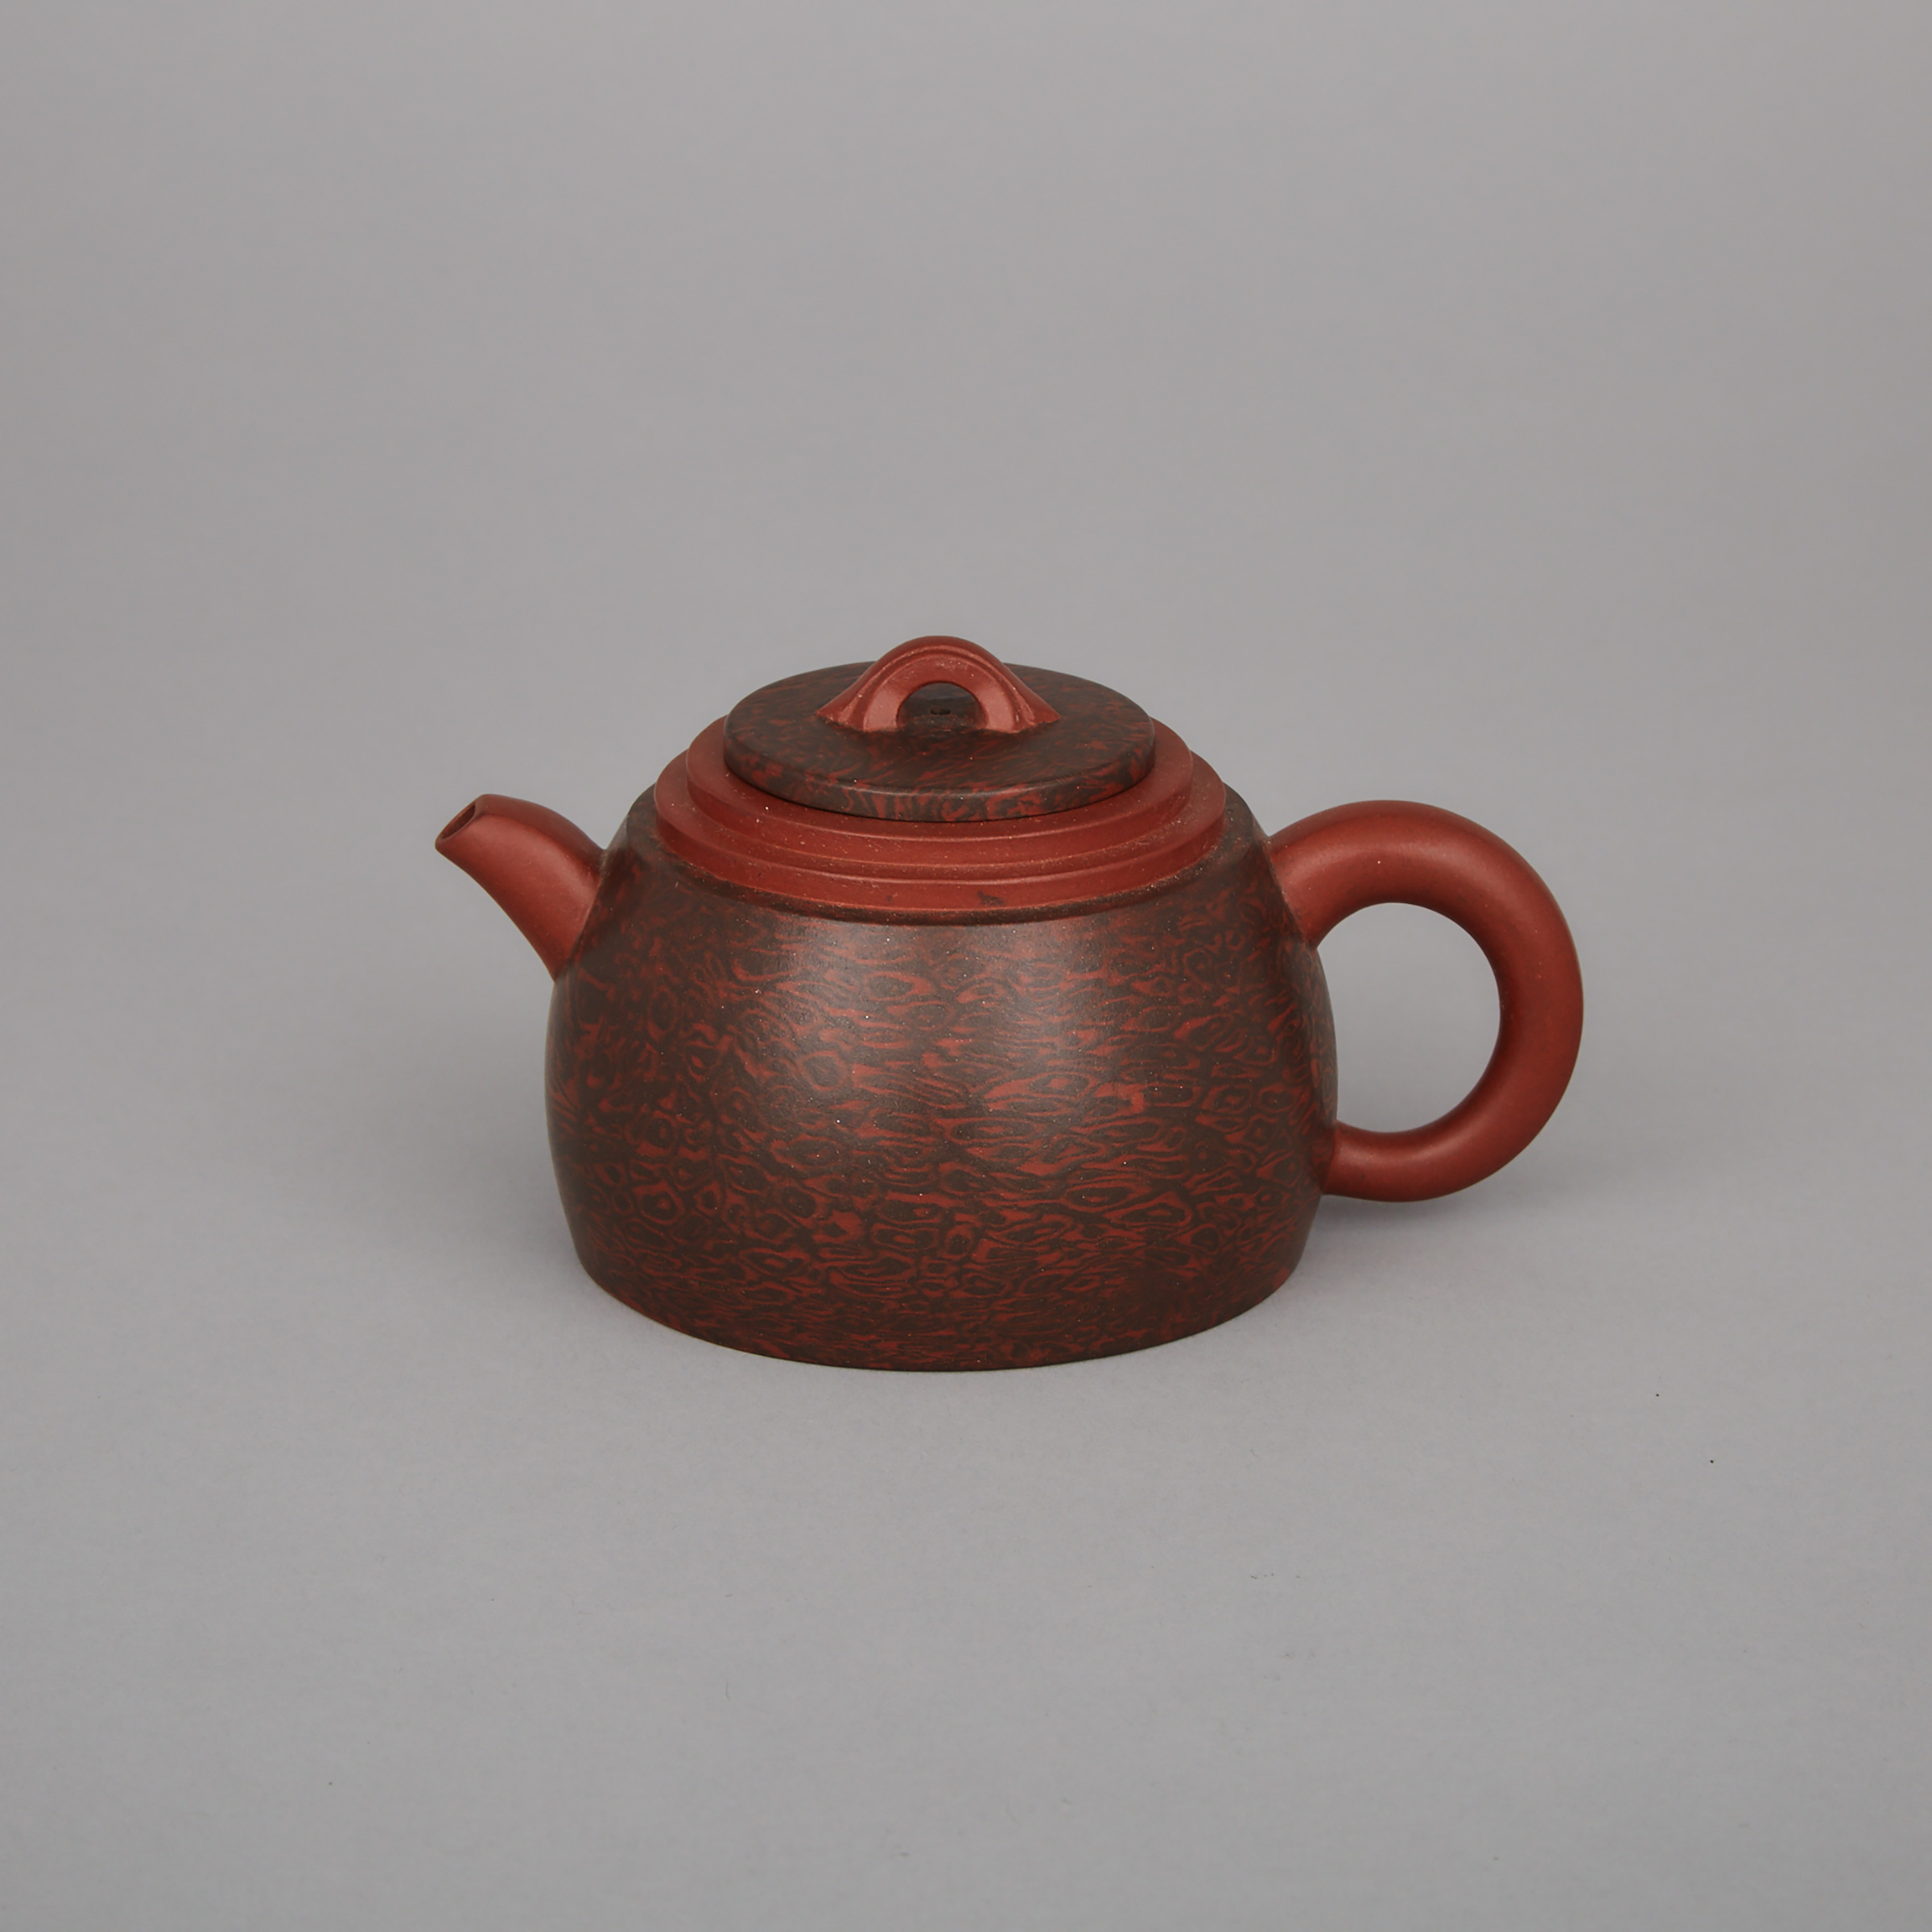 An ‘Imitation-Lacquer’ Yixing Stoneware Teapot and Cover, Signed Bao Tingbo